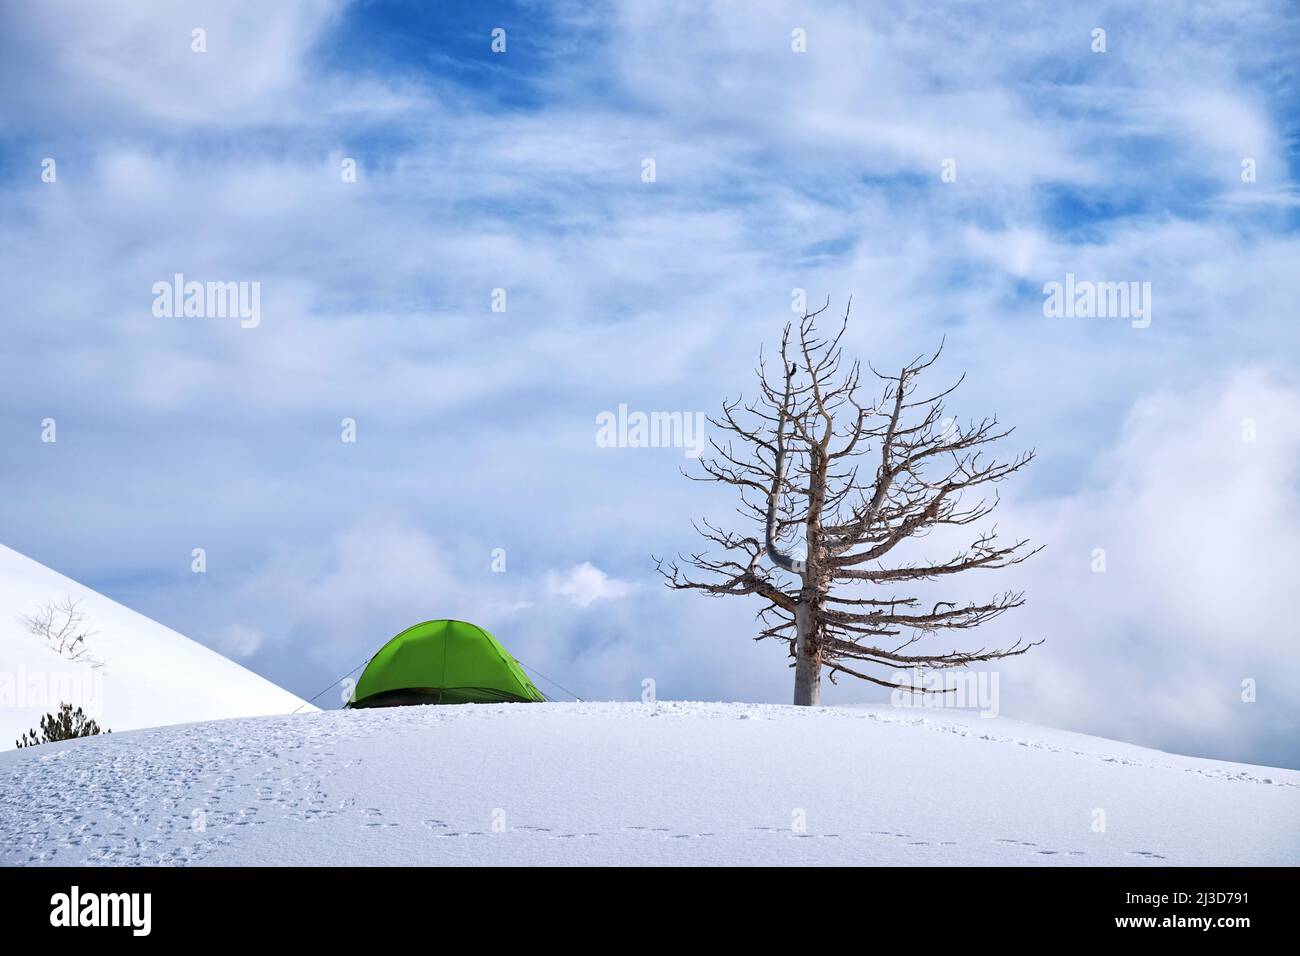 green tent and dead tree against cloudy sky in winter Etna Park, Sicily Stock Photo